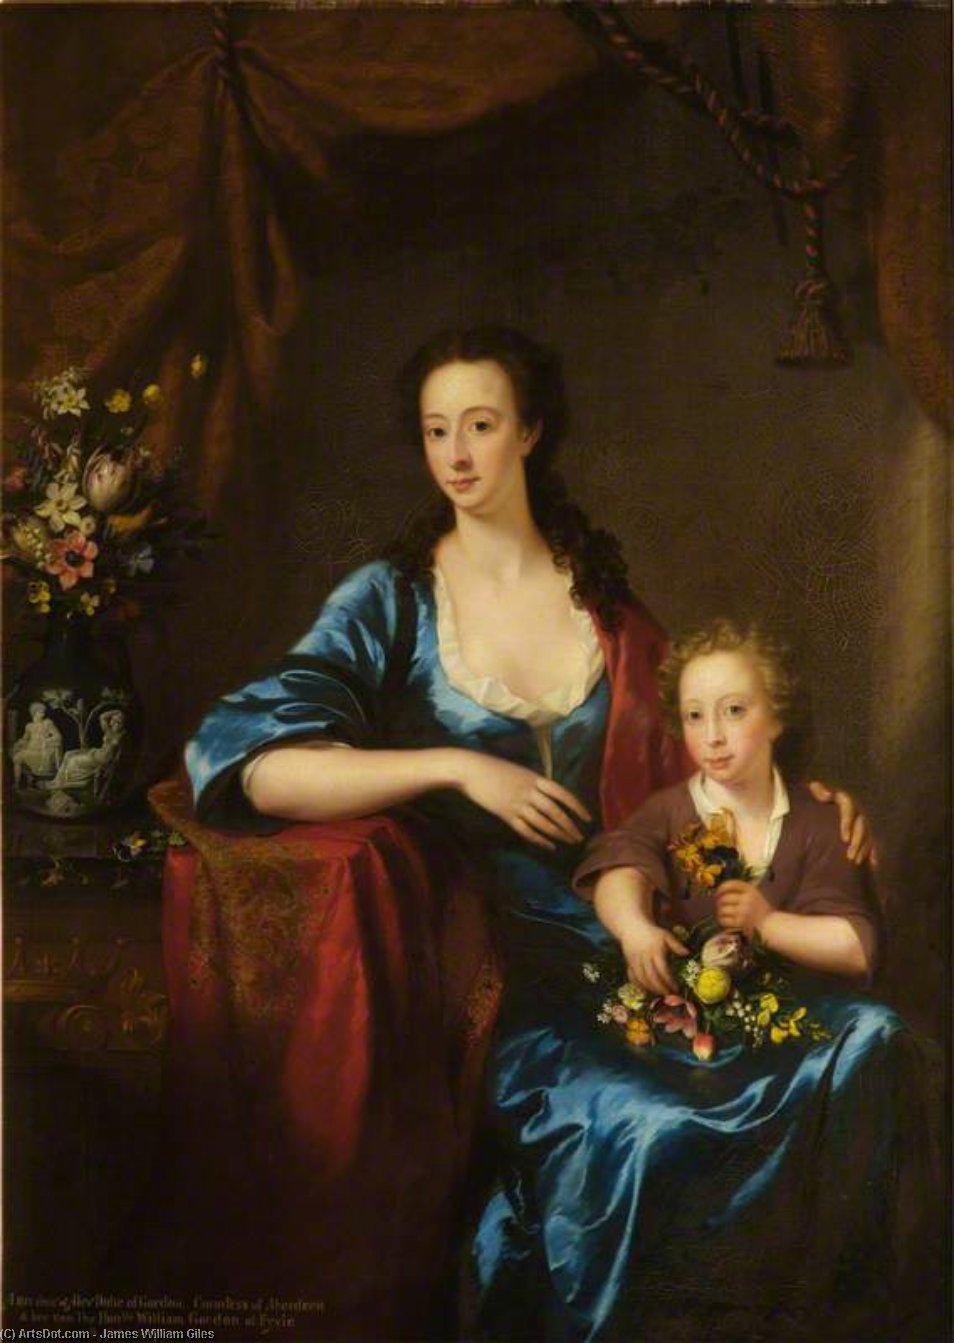 Order Paintings Reproductions Anne), Countess Of Aberdeen, And Her Son, Lord William Gordon Of Fyvie by James William Giles (1801-1870, United Kingdom) | ArtsDot.com